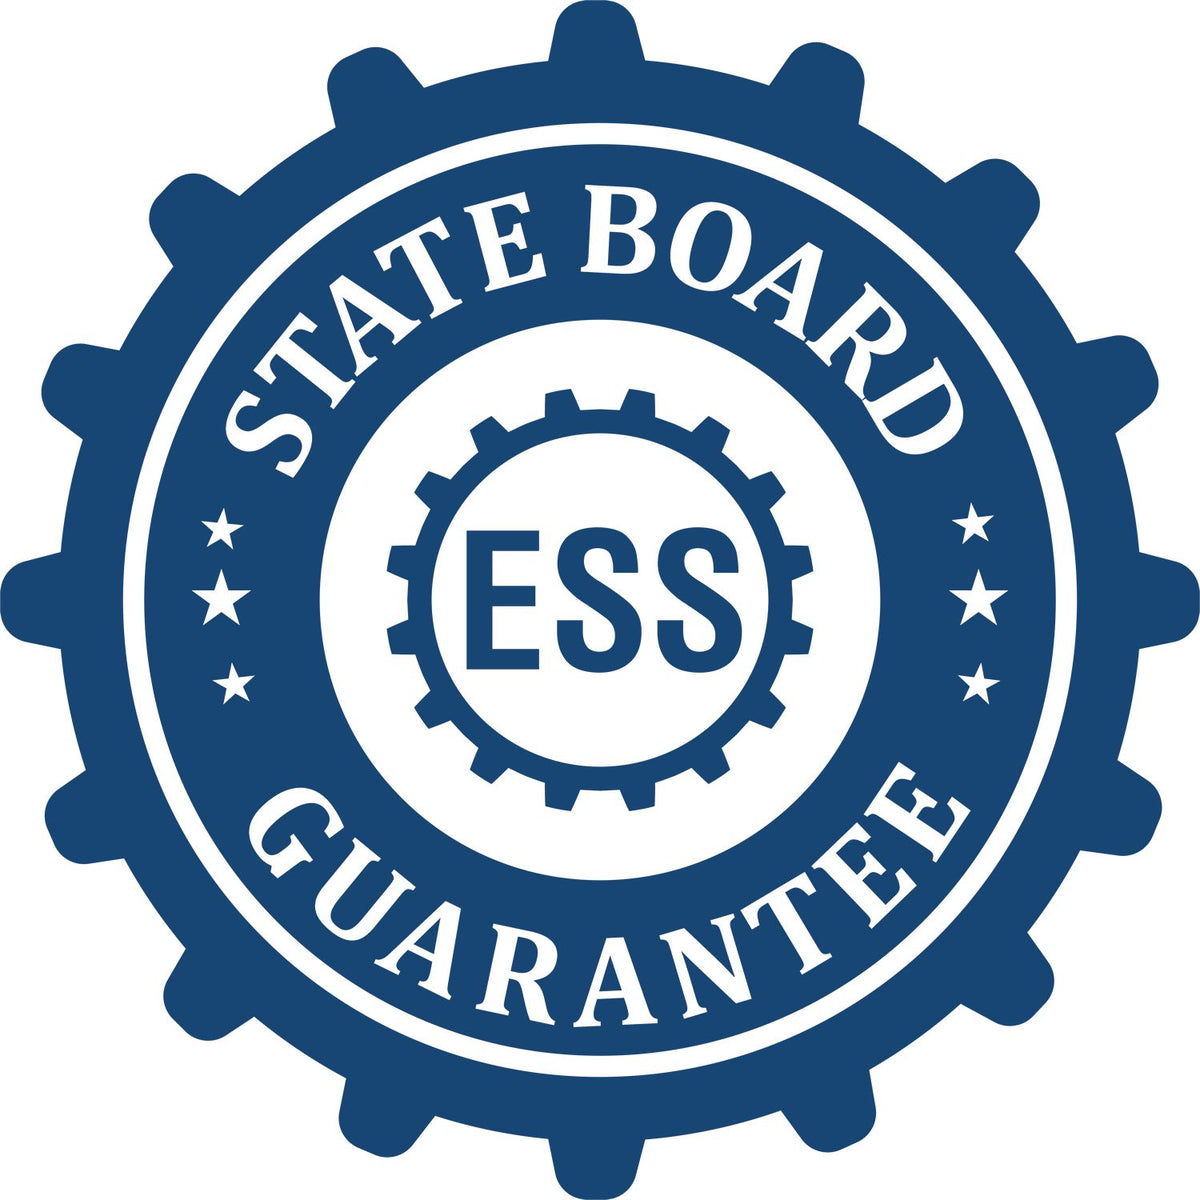 An emblem in a gear shape illustrating a state board guarantee for the Arkansas Engineer Desk Seal product.